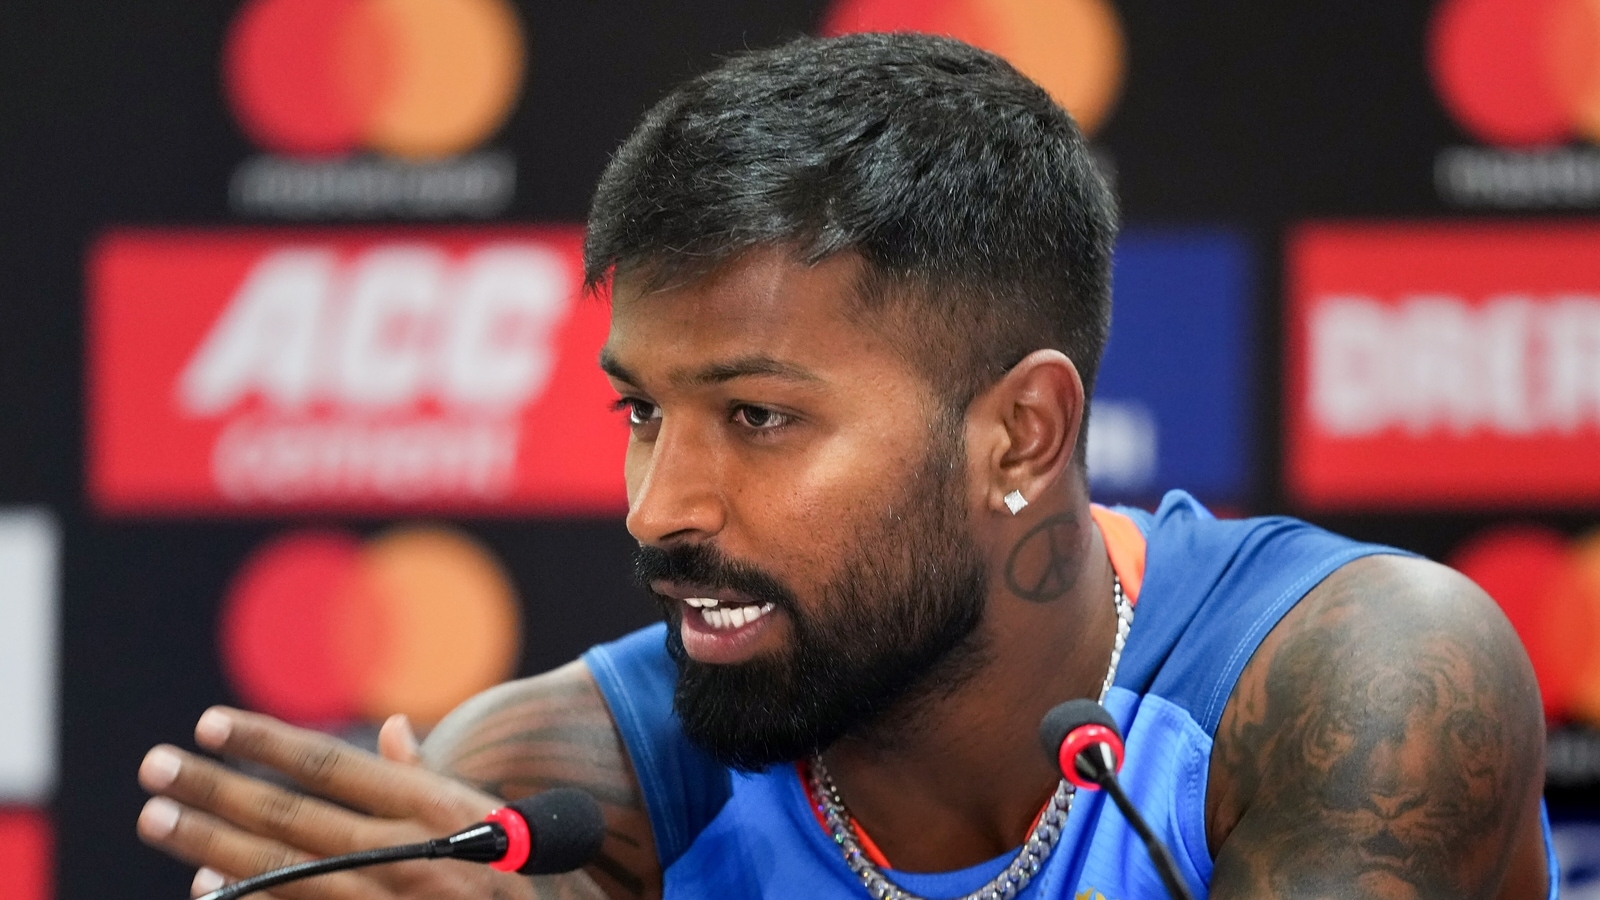 Take a look at the arsenal of luxury timepieces owned by Hardik Pandya